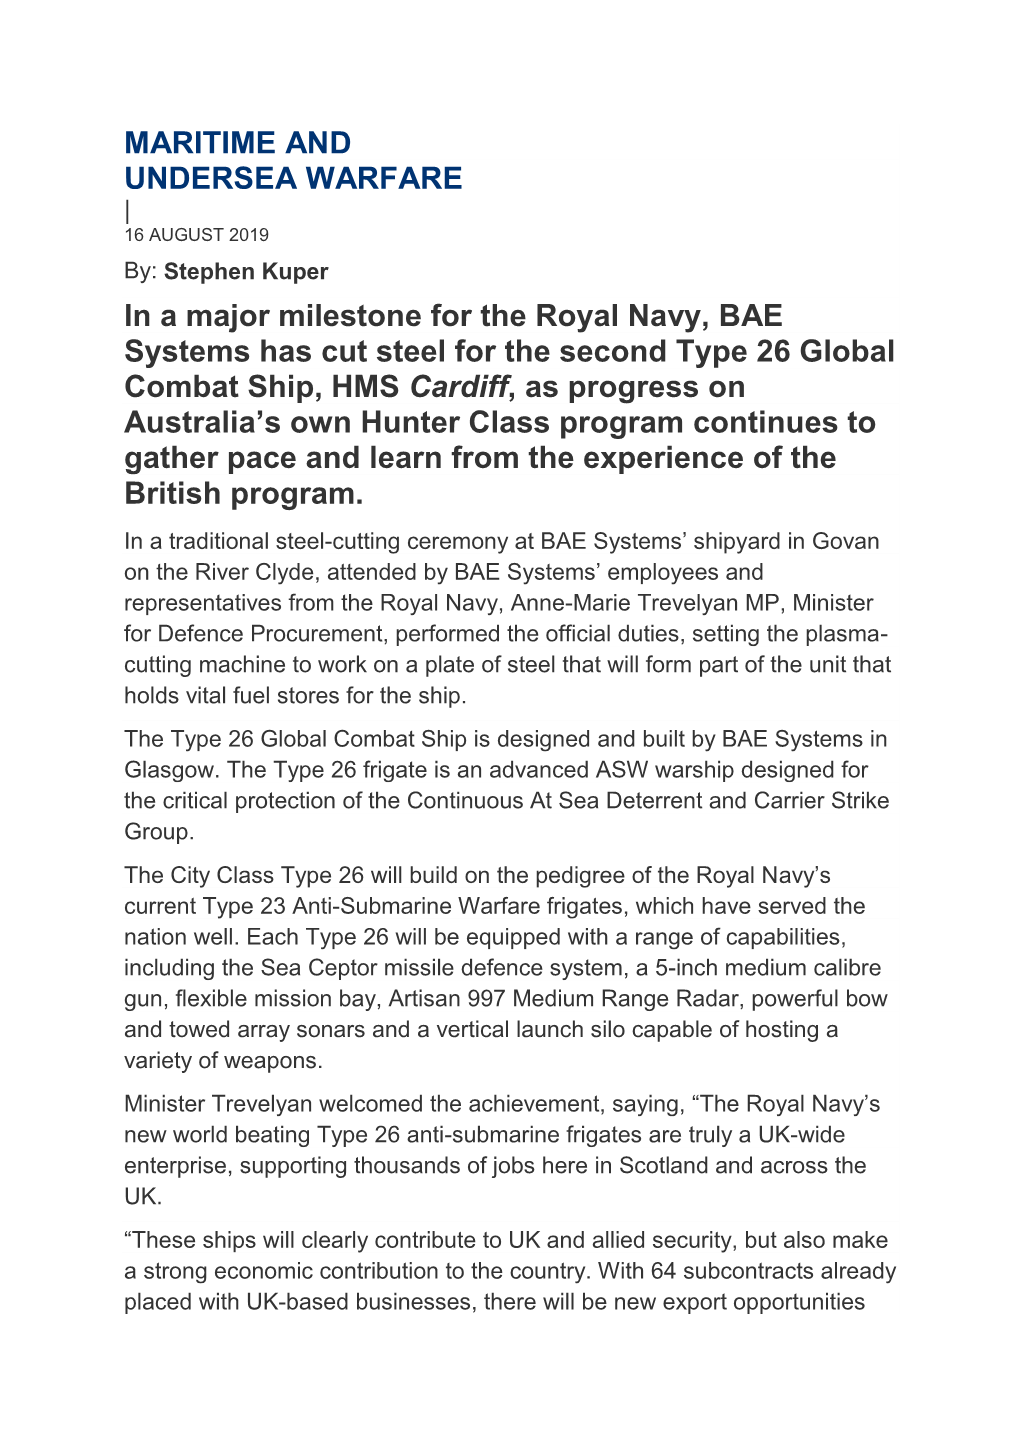 MARITIME and UNDERSEA WARFARE in a Major Milestone for the Royal Navy, BAE Systems Has Cut Steel for the Second Type 26 Global C